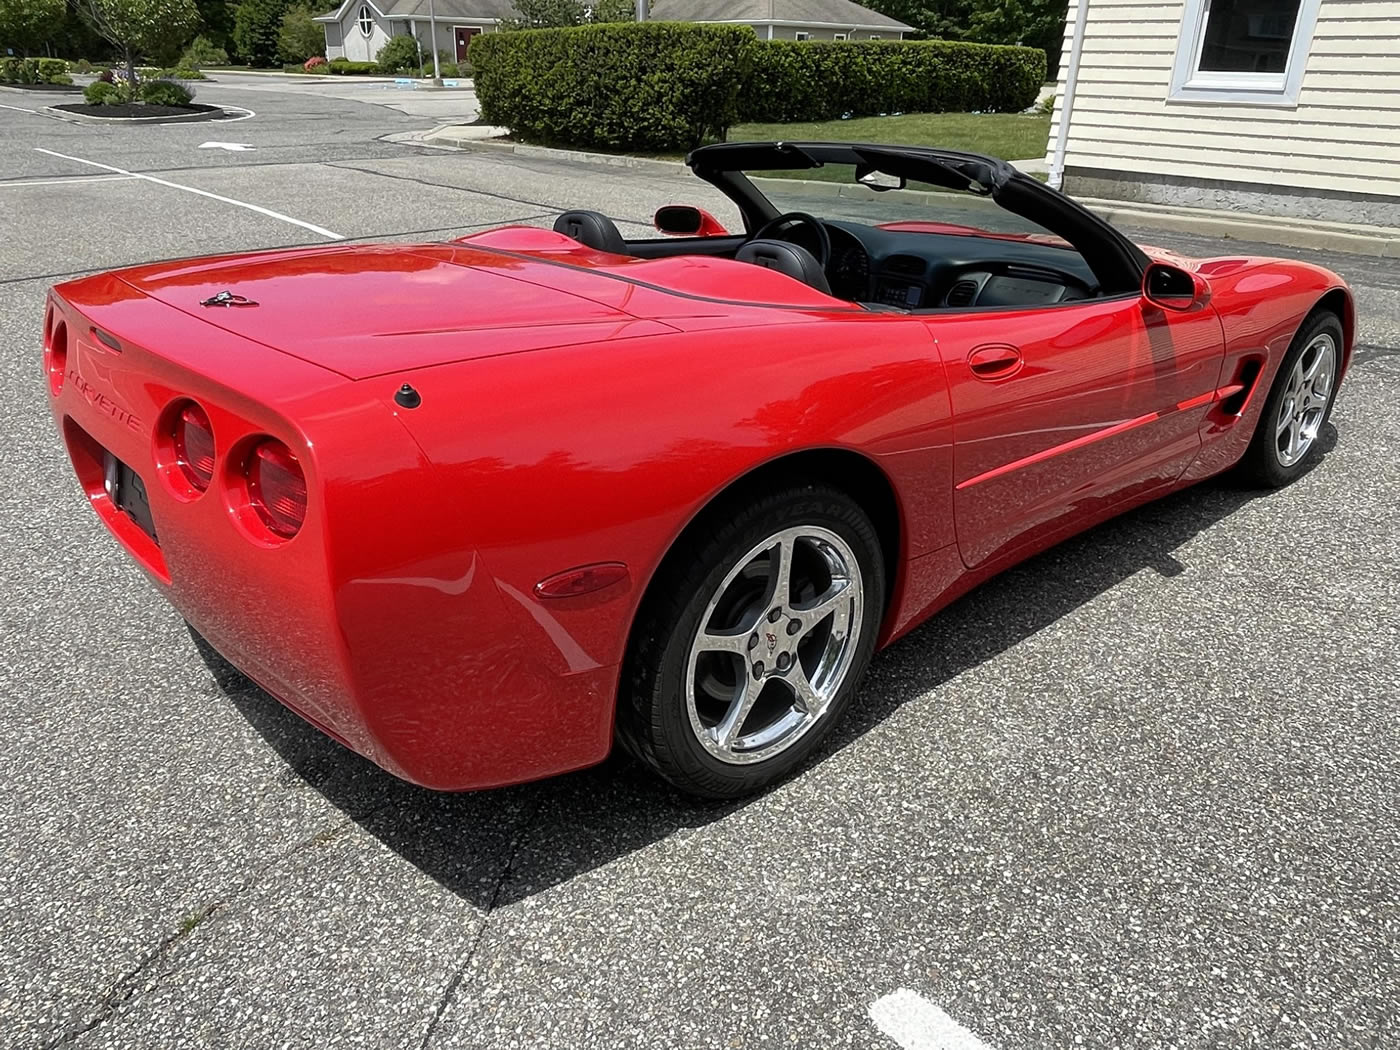 2002 Corvette Convertible in Torch Red